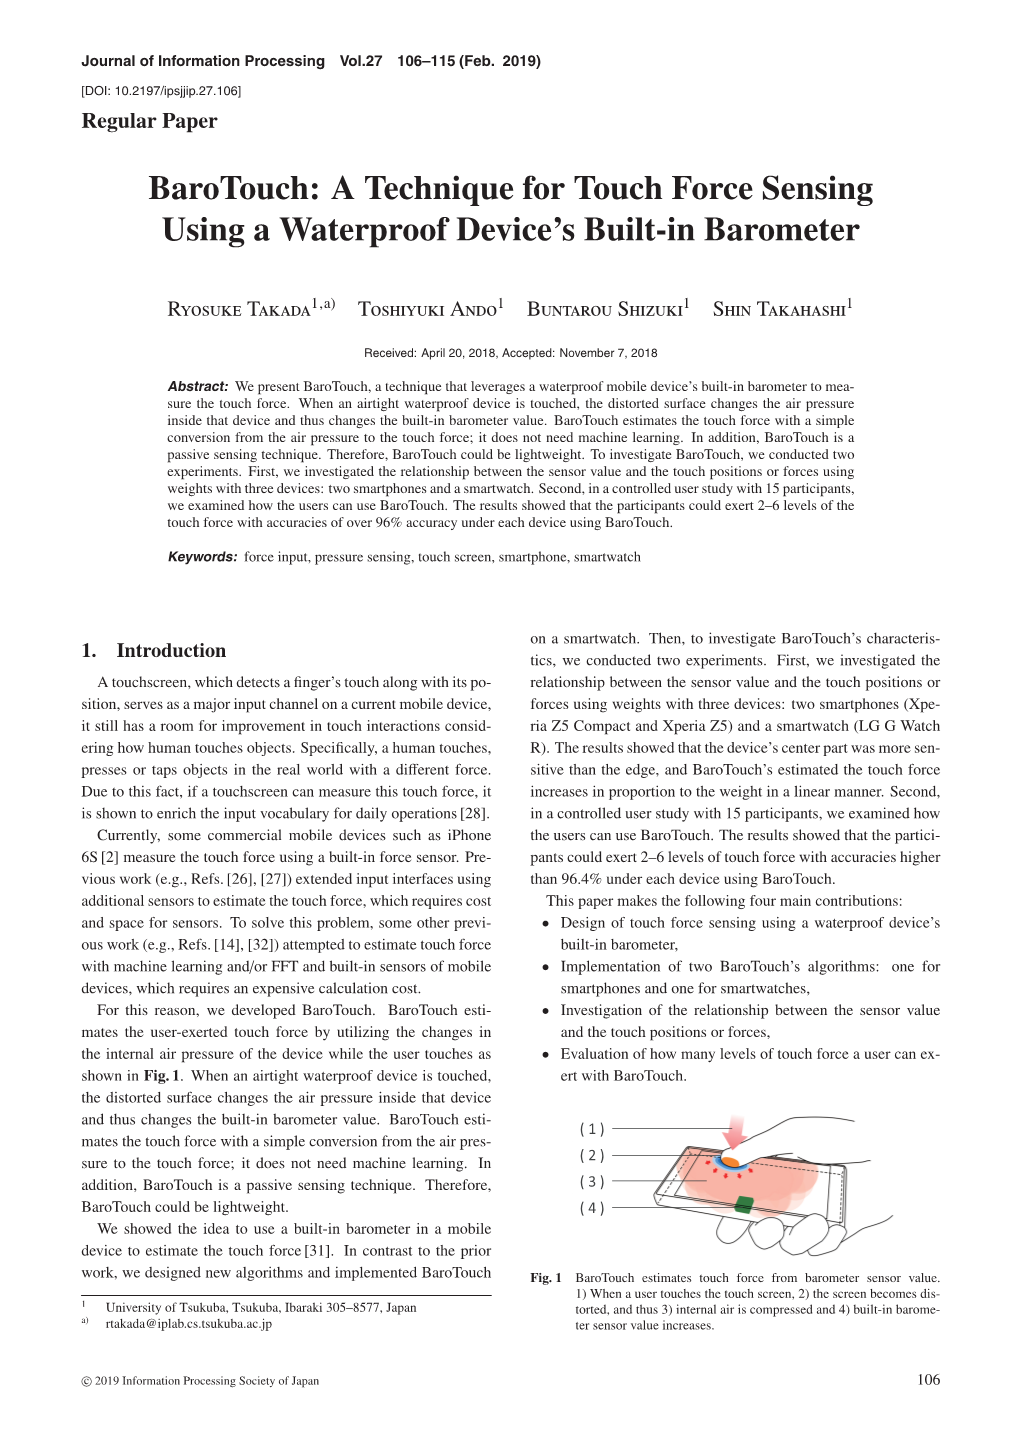 Barotouch: a Technique for Touch Force Sensing Using a Waterproof Device’S Built-In Barometer